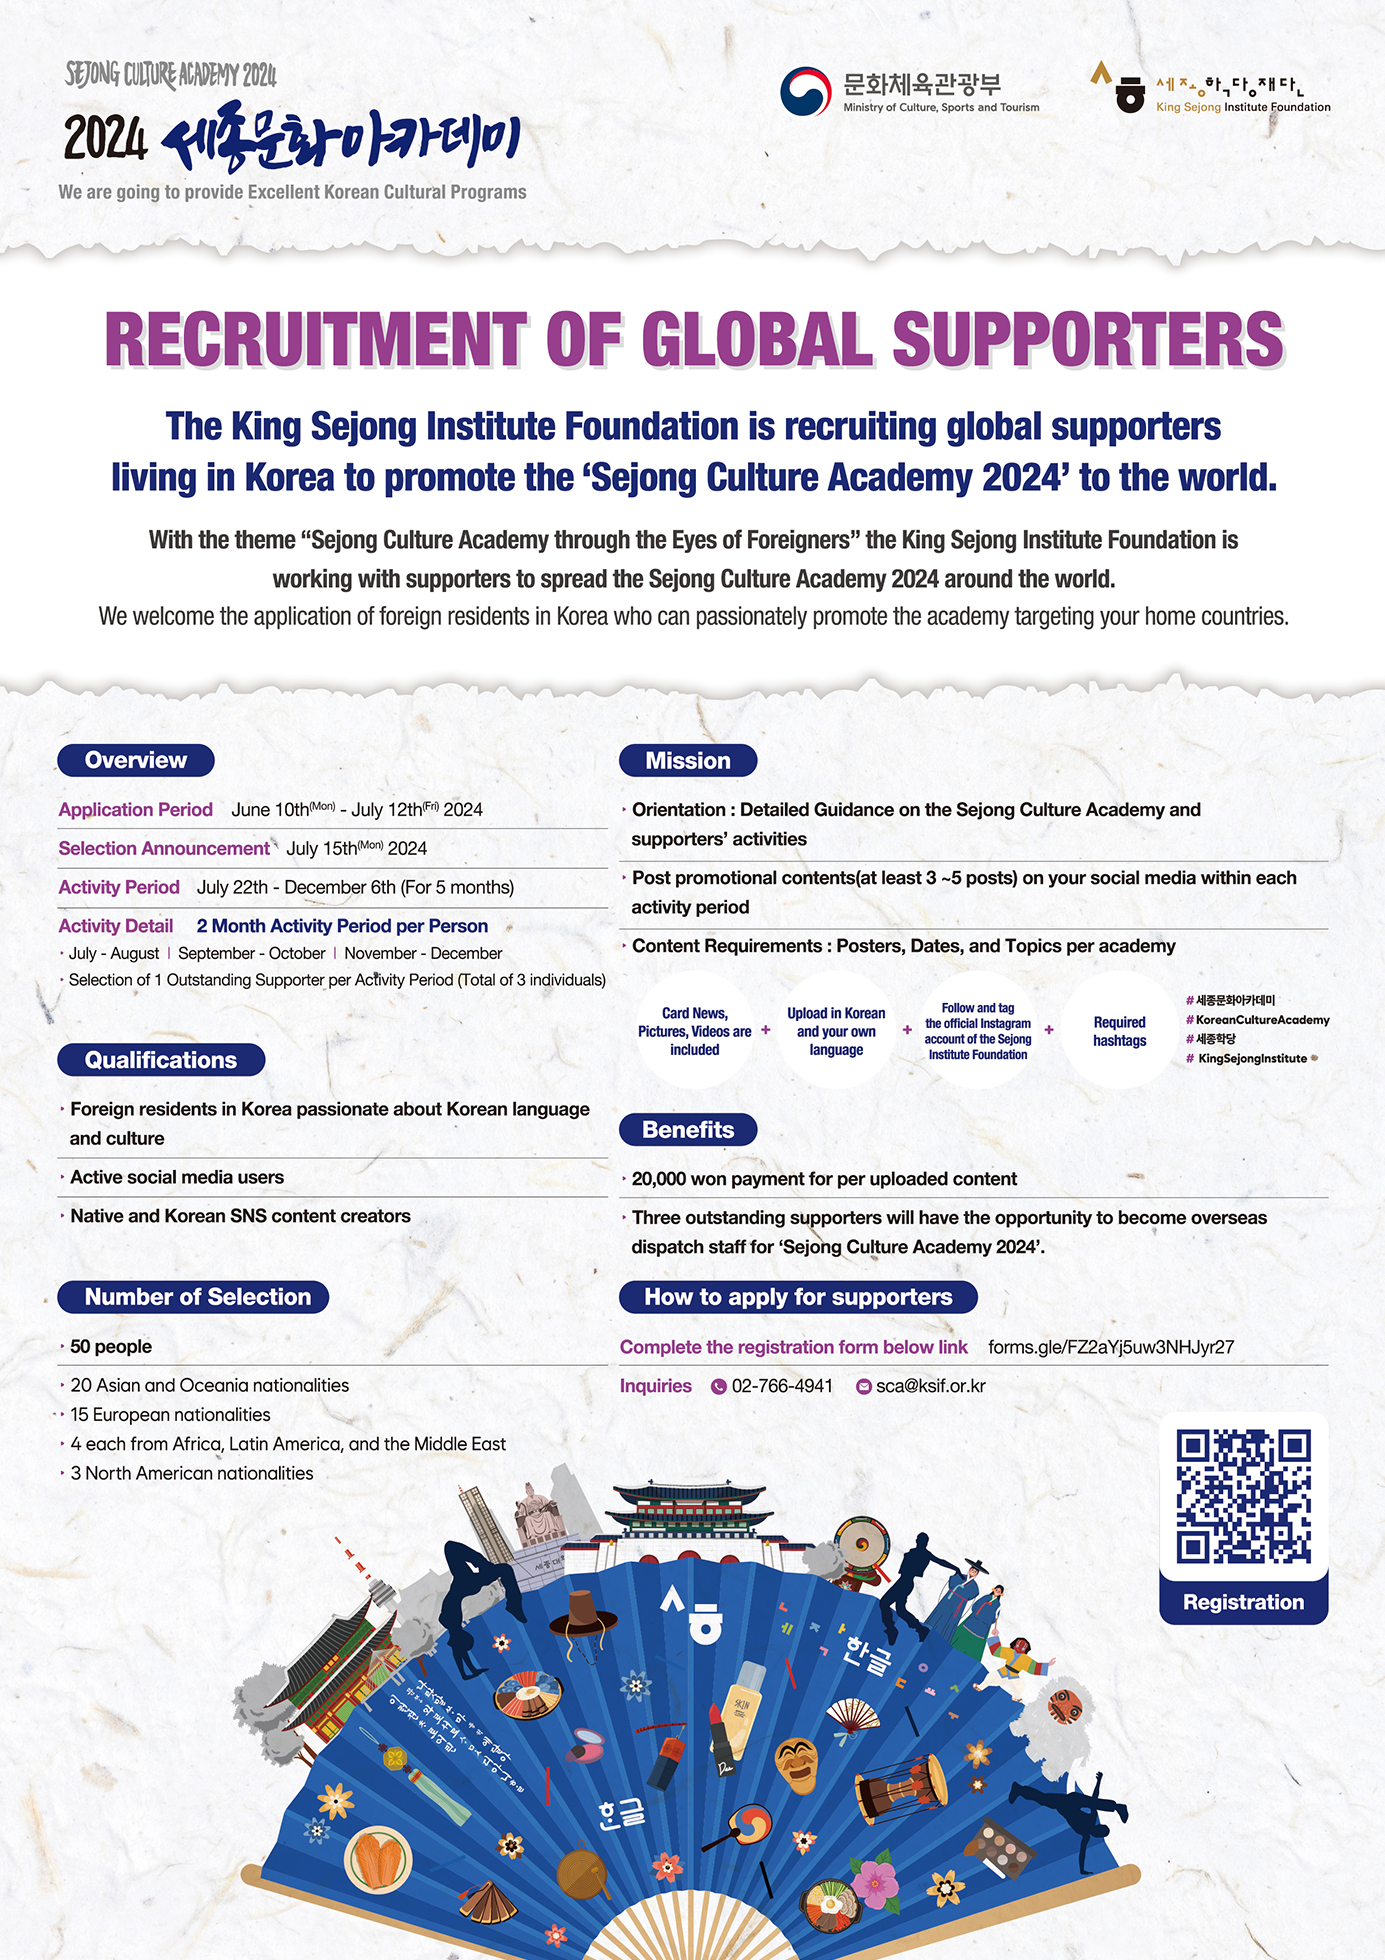 Recruitment of Supporters